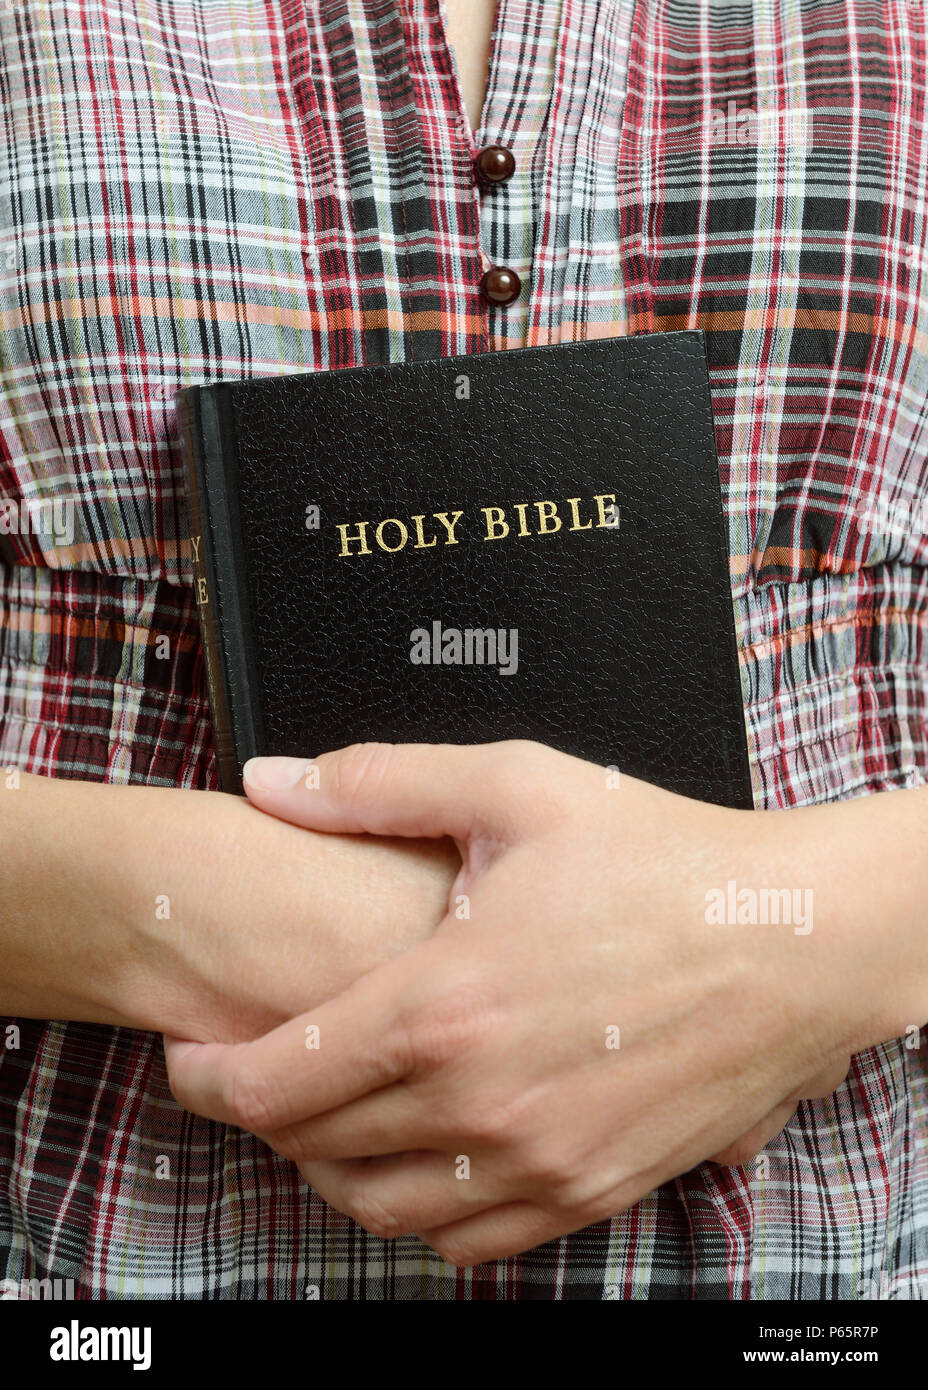 Young Woman Holding a Bible Stock Photo - Alamy